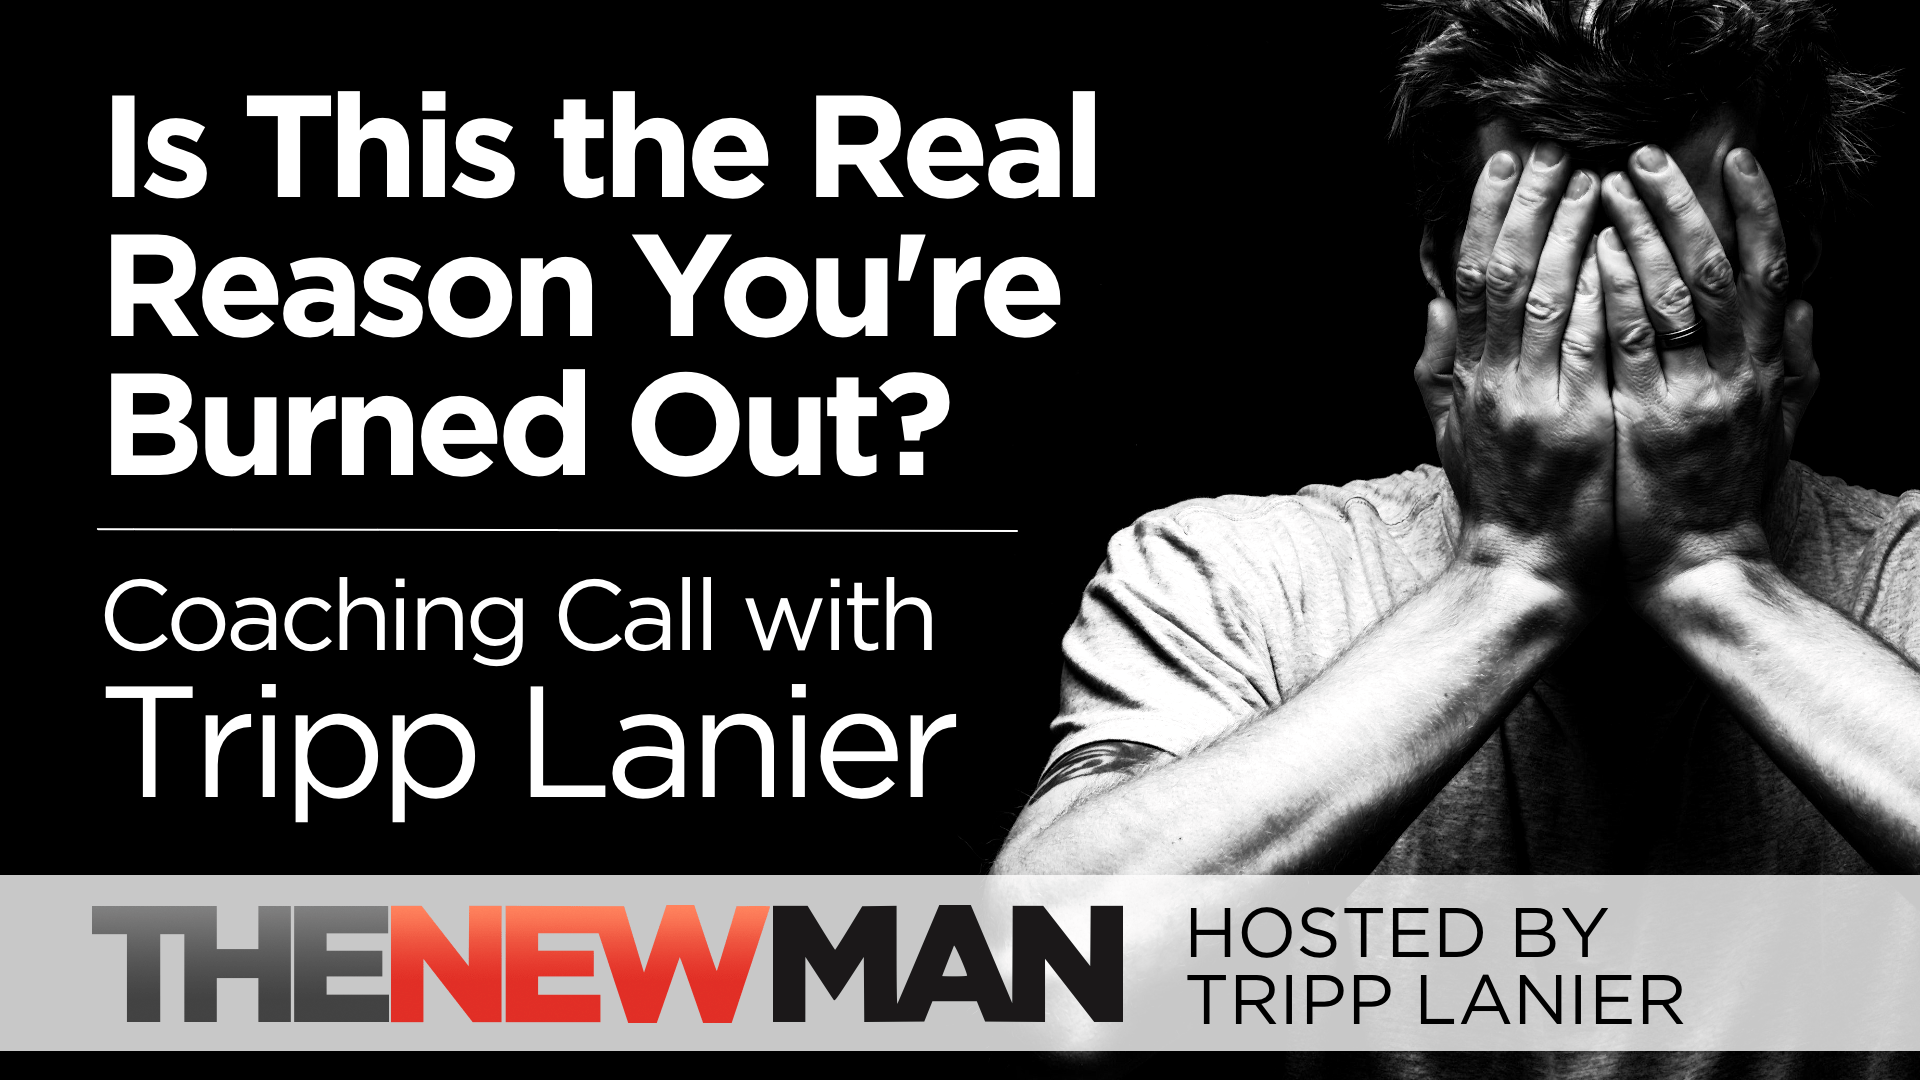 The Painful Reason You’re Burned Out — Coaching Call with Tripp Lanier